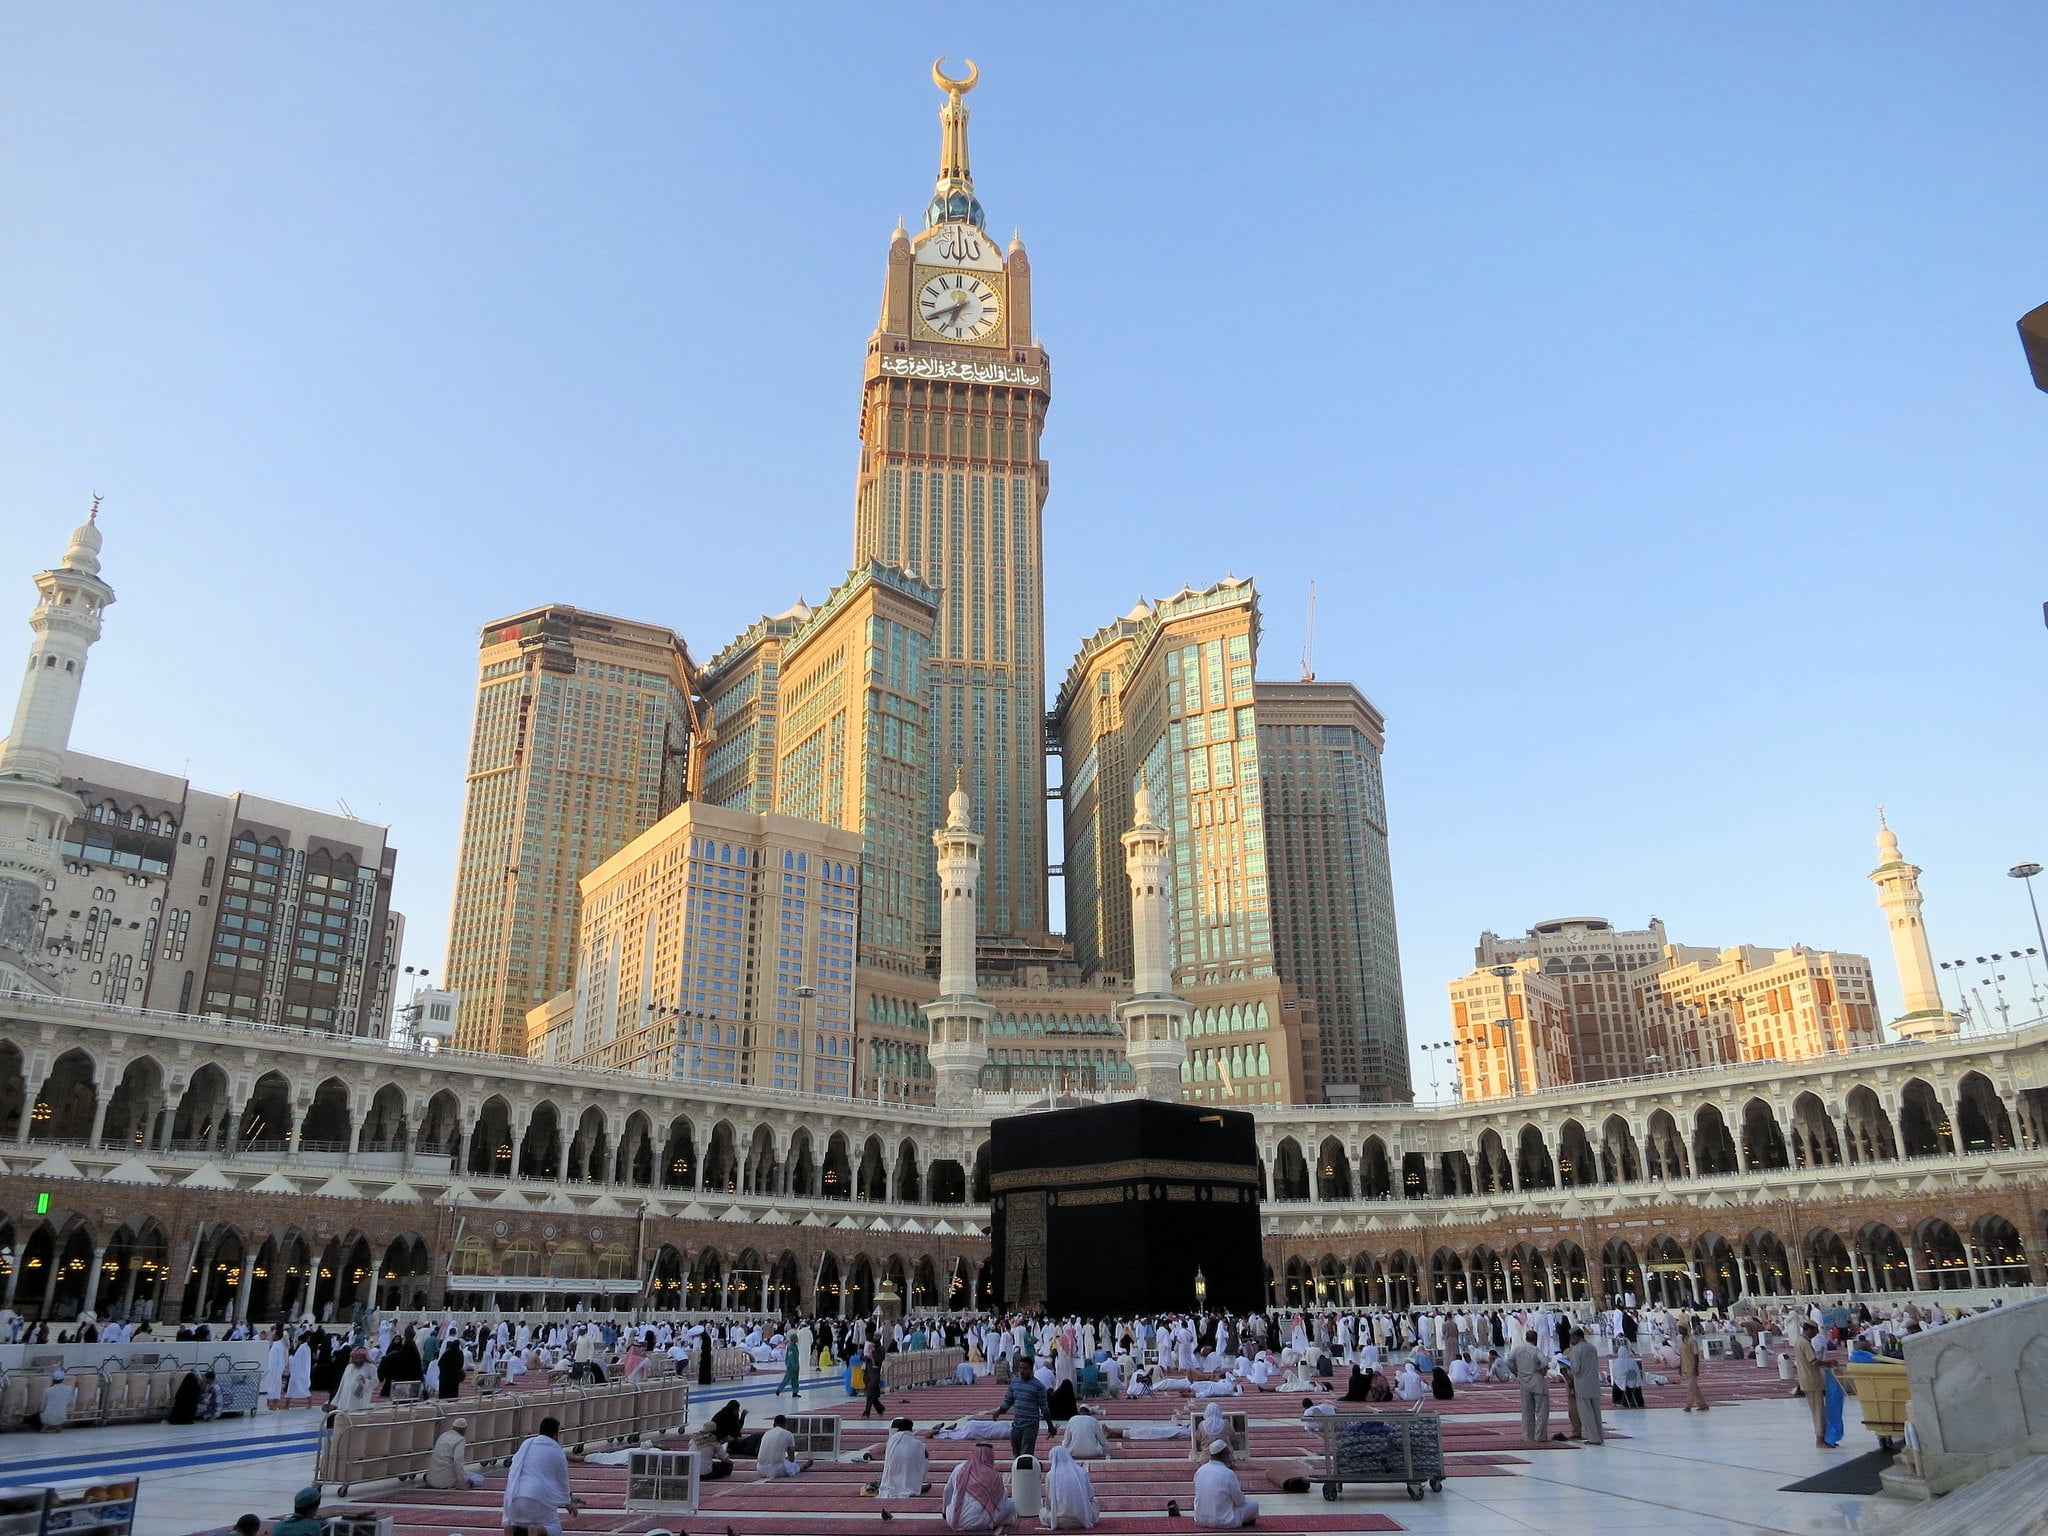 Only People Who Got Covid Vaccine Can Visit Masjid al Haram and Nabawi During Ramadan 2021